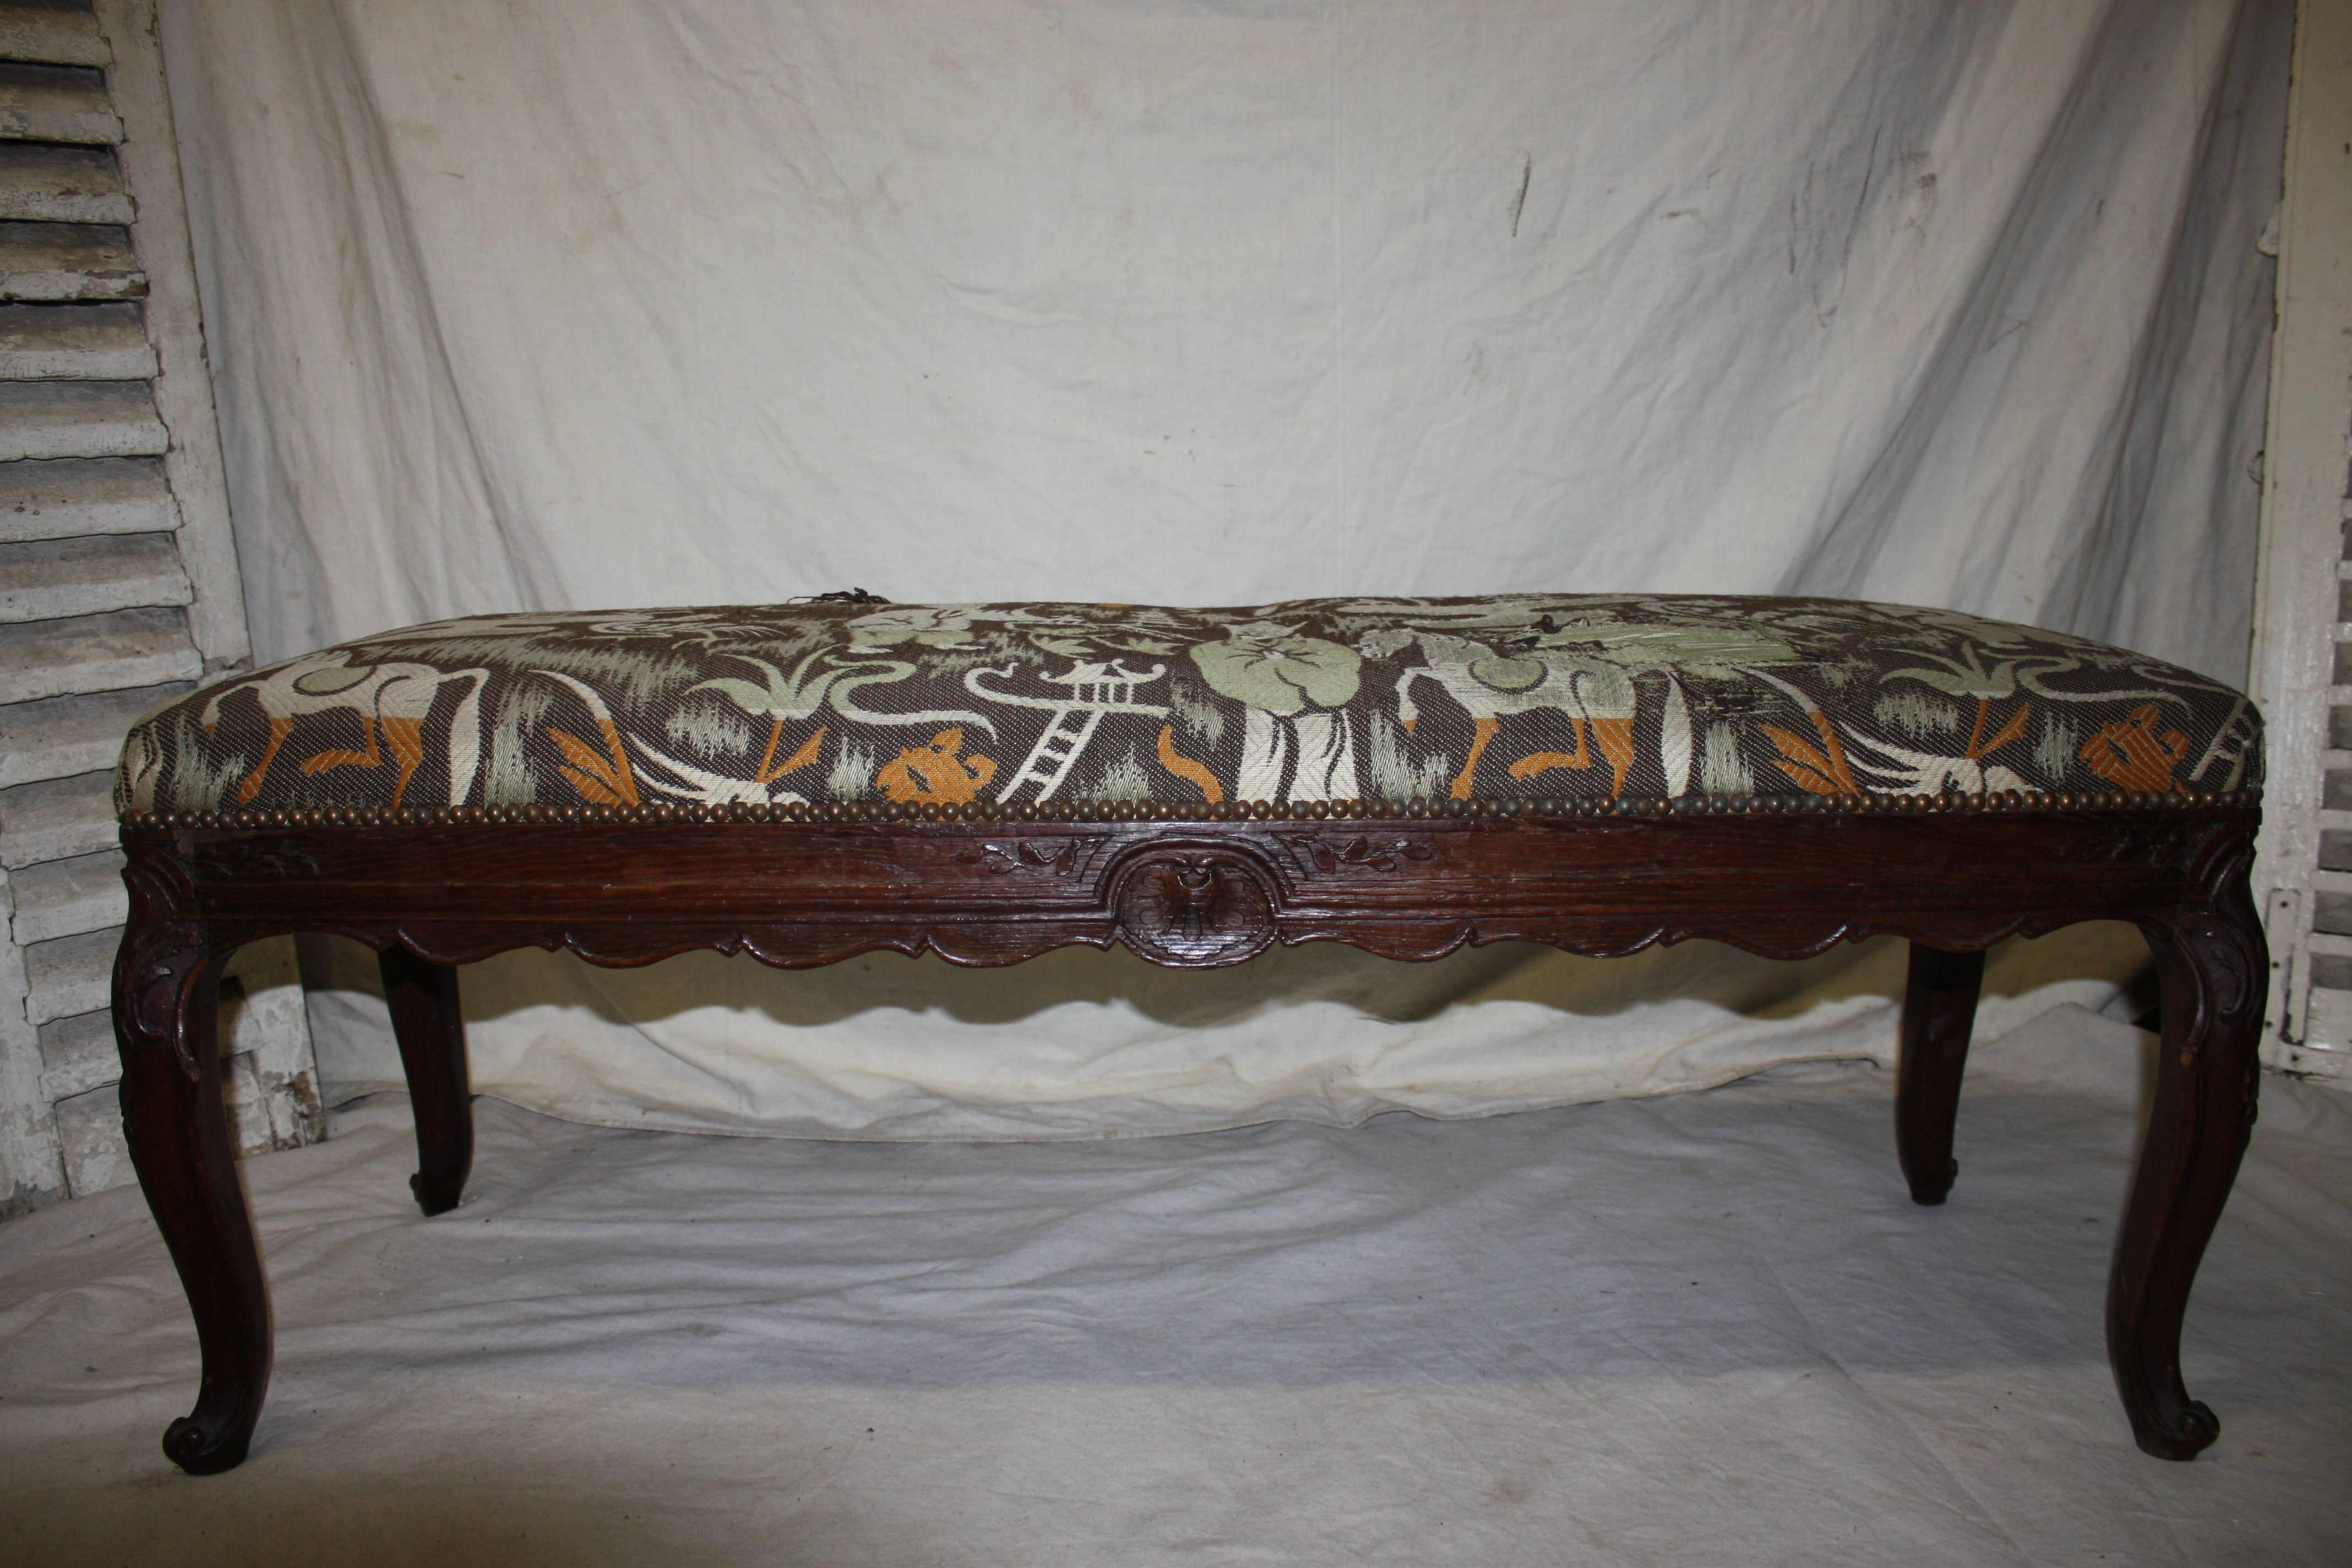 Late 18th century Italian carved wood bench.